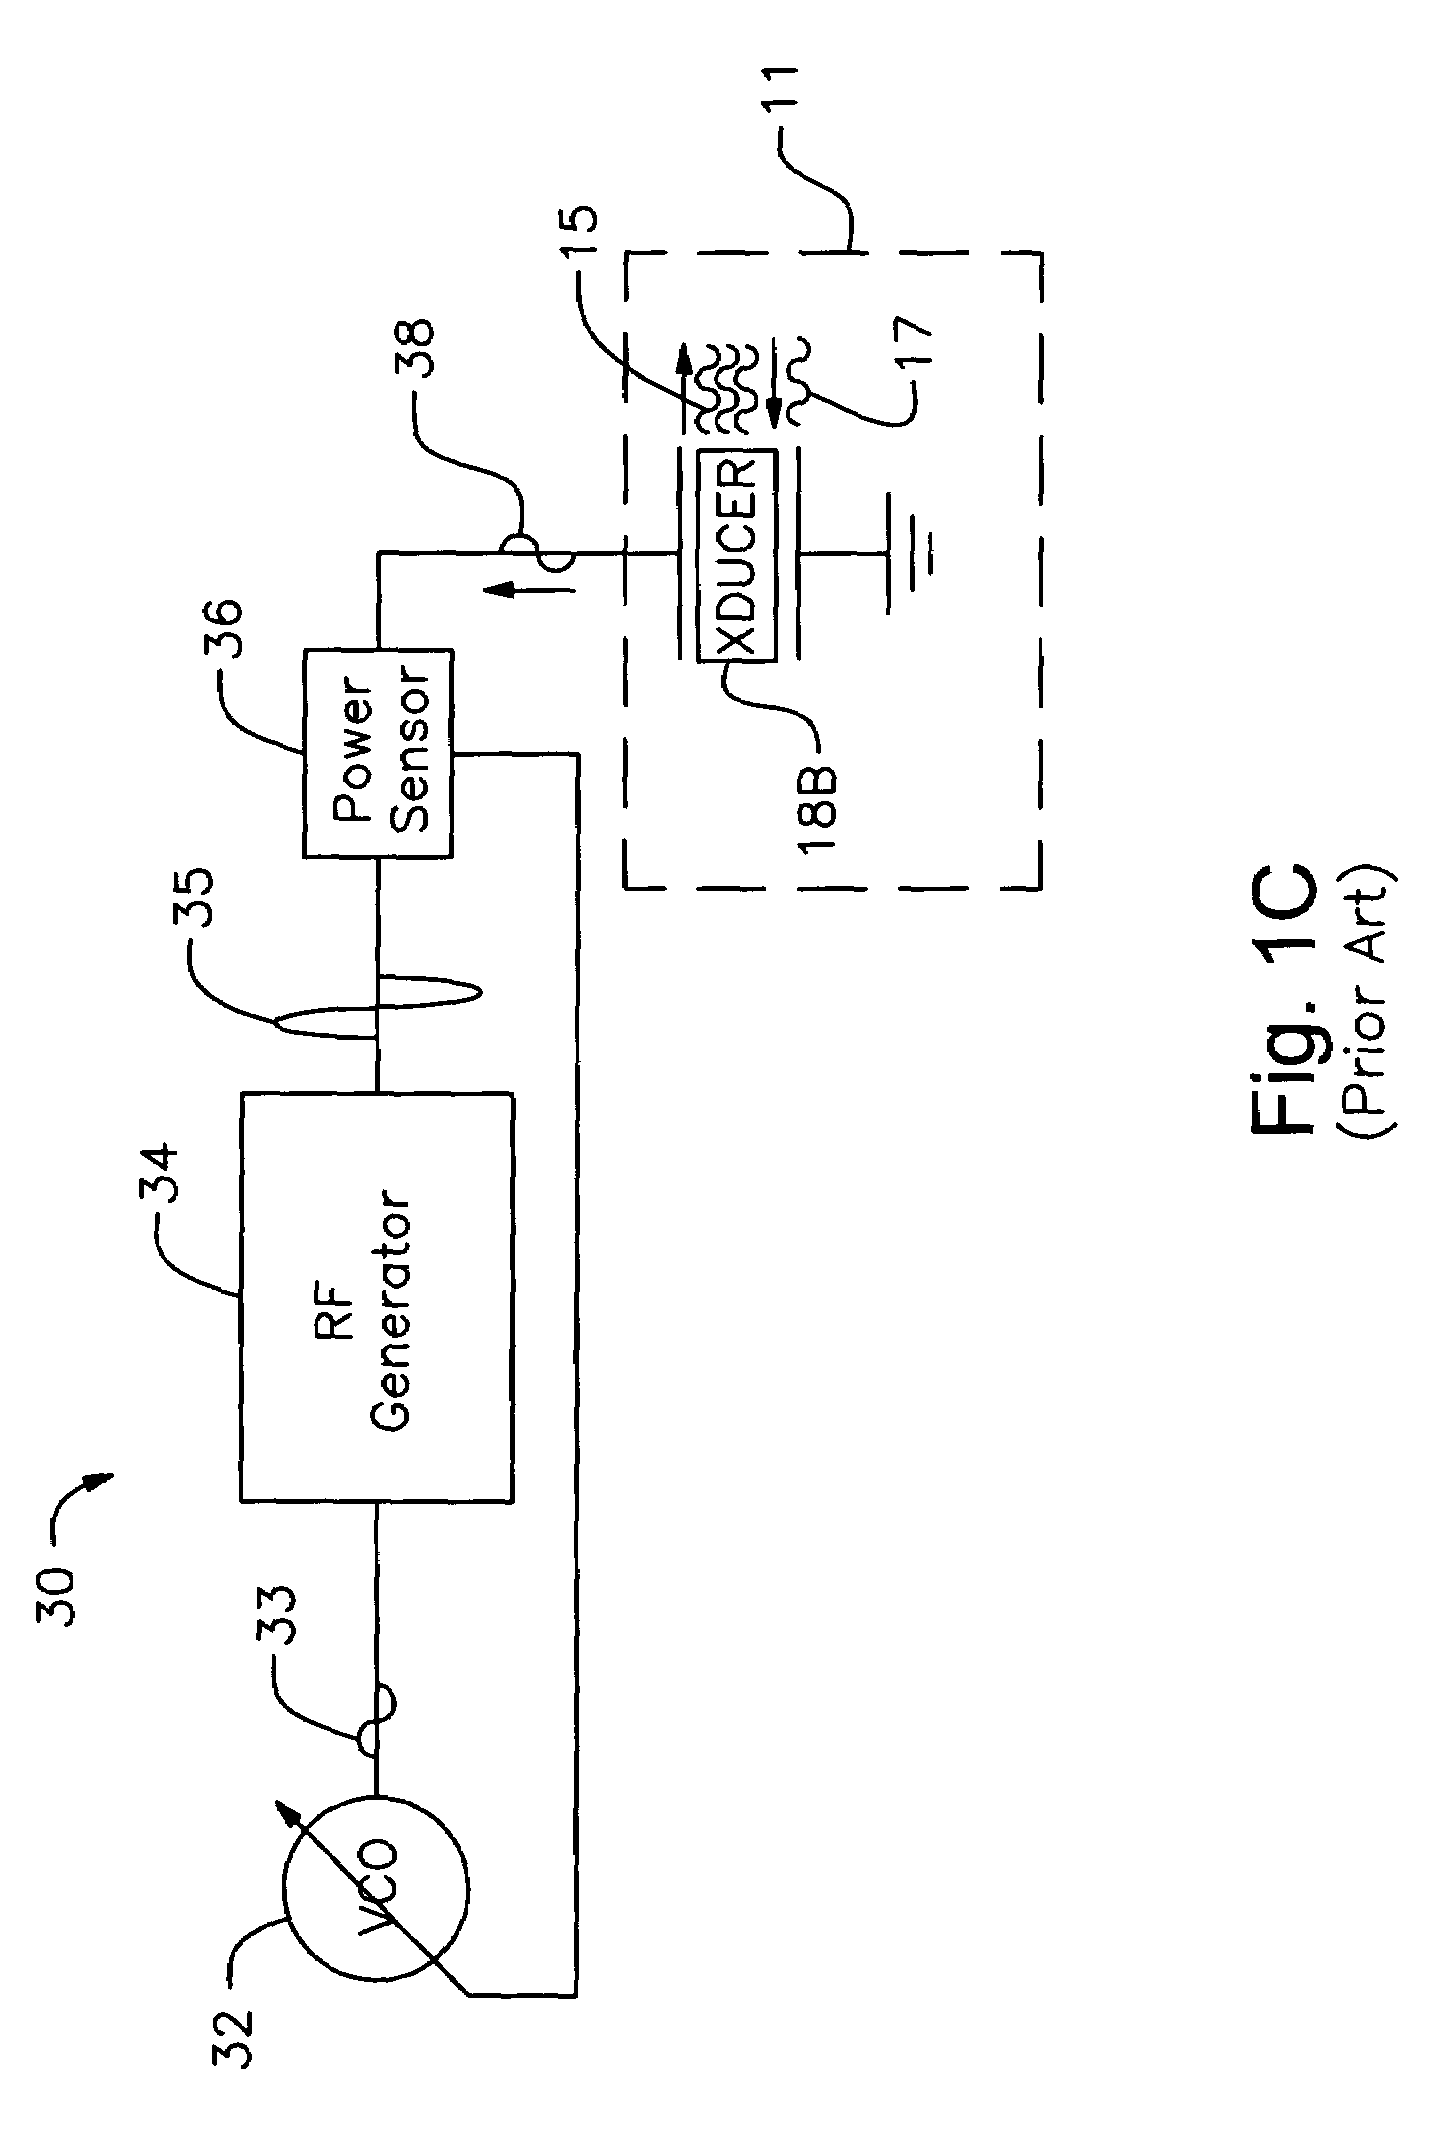 System, method and apparatus for constant voltage control of RF generator for optimum operation